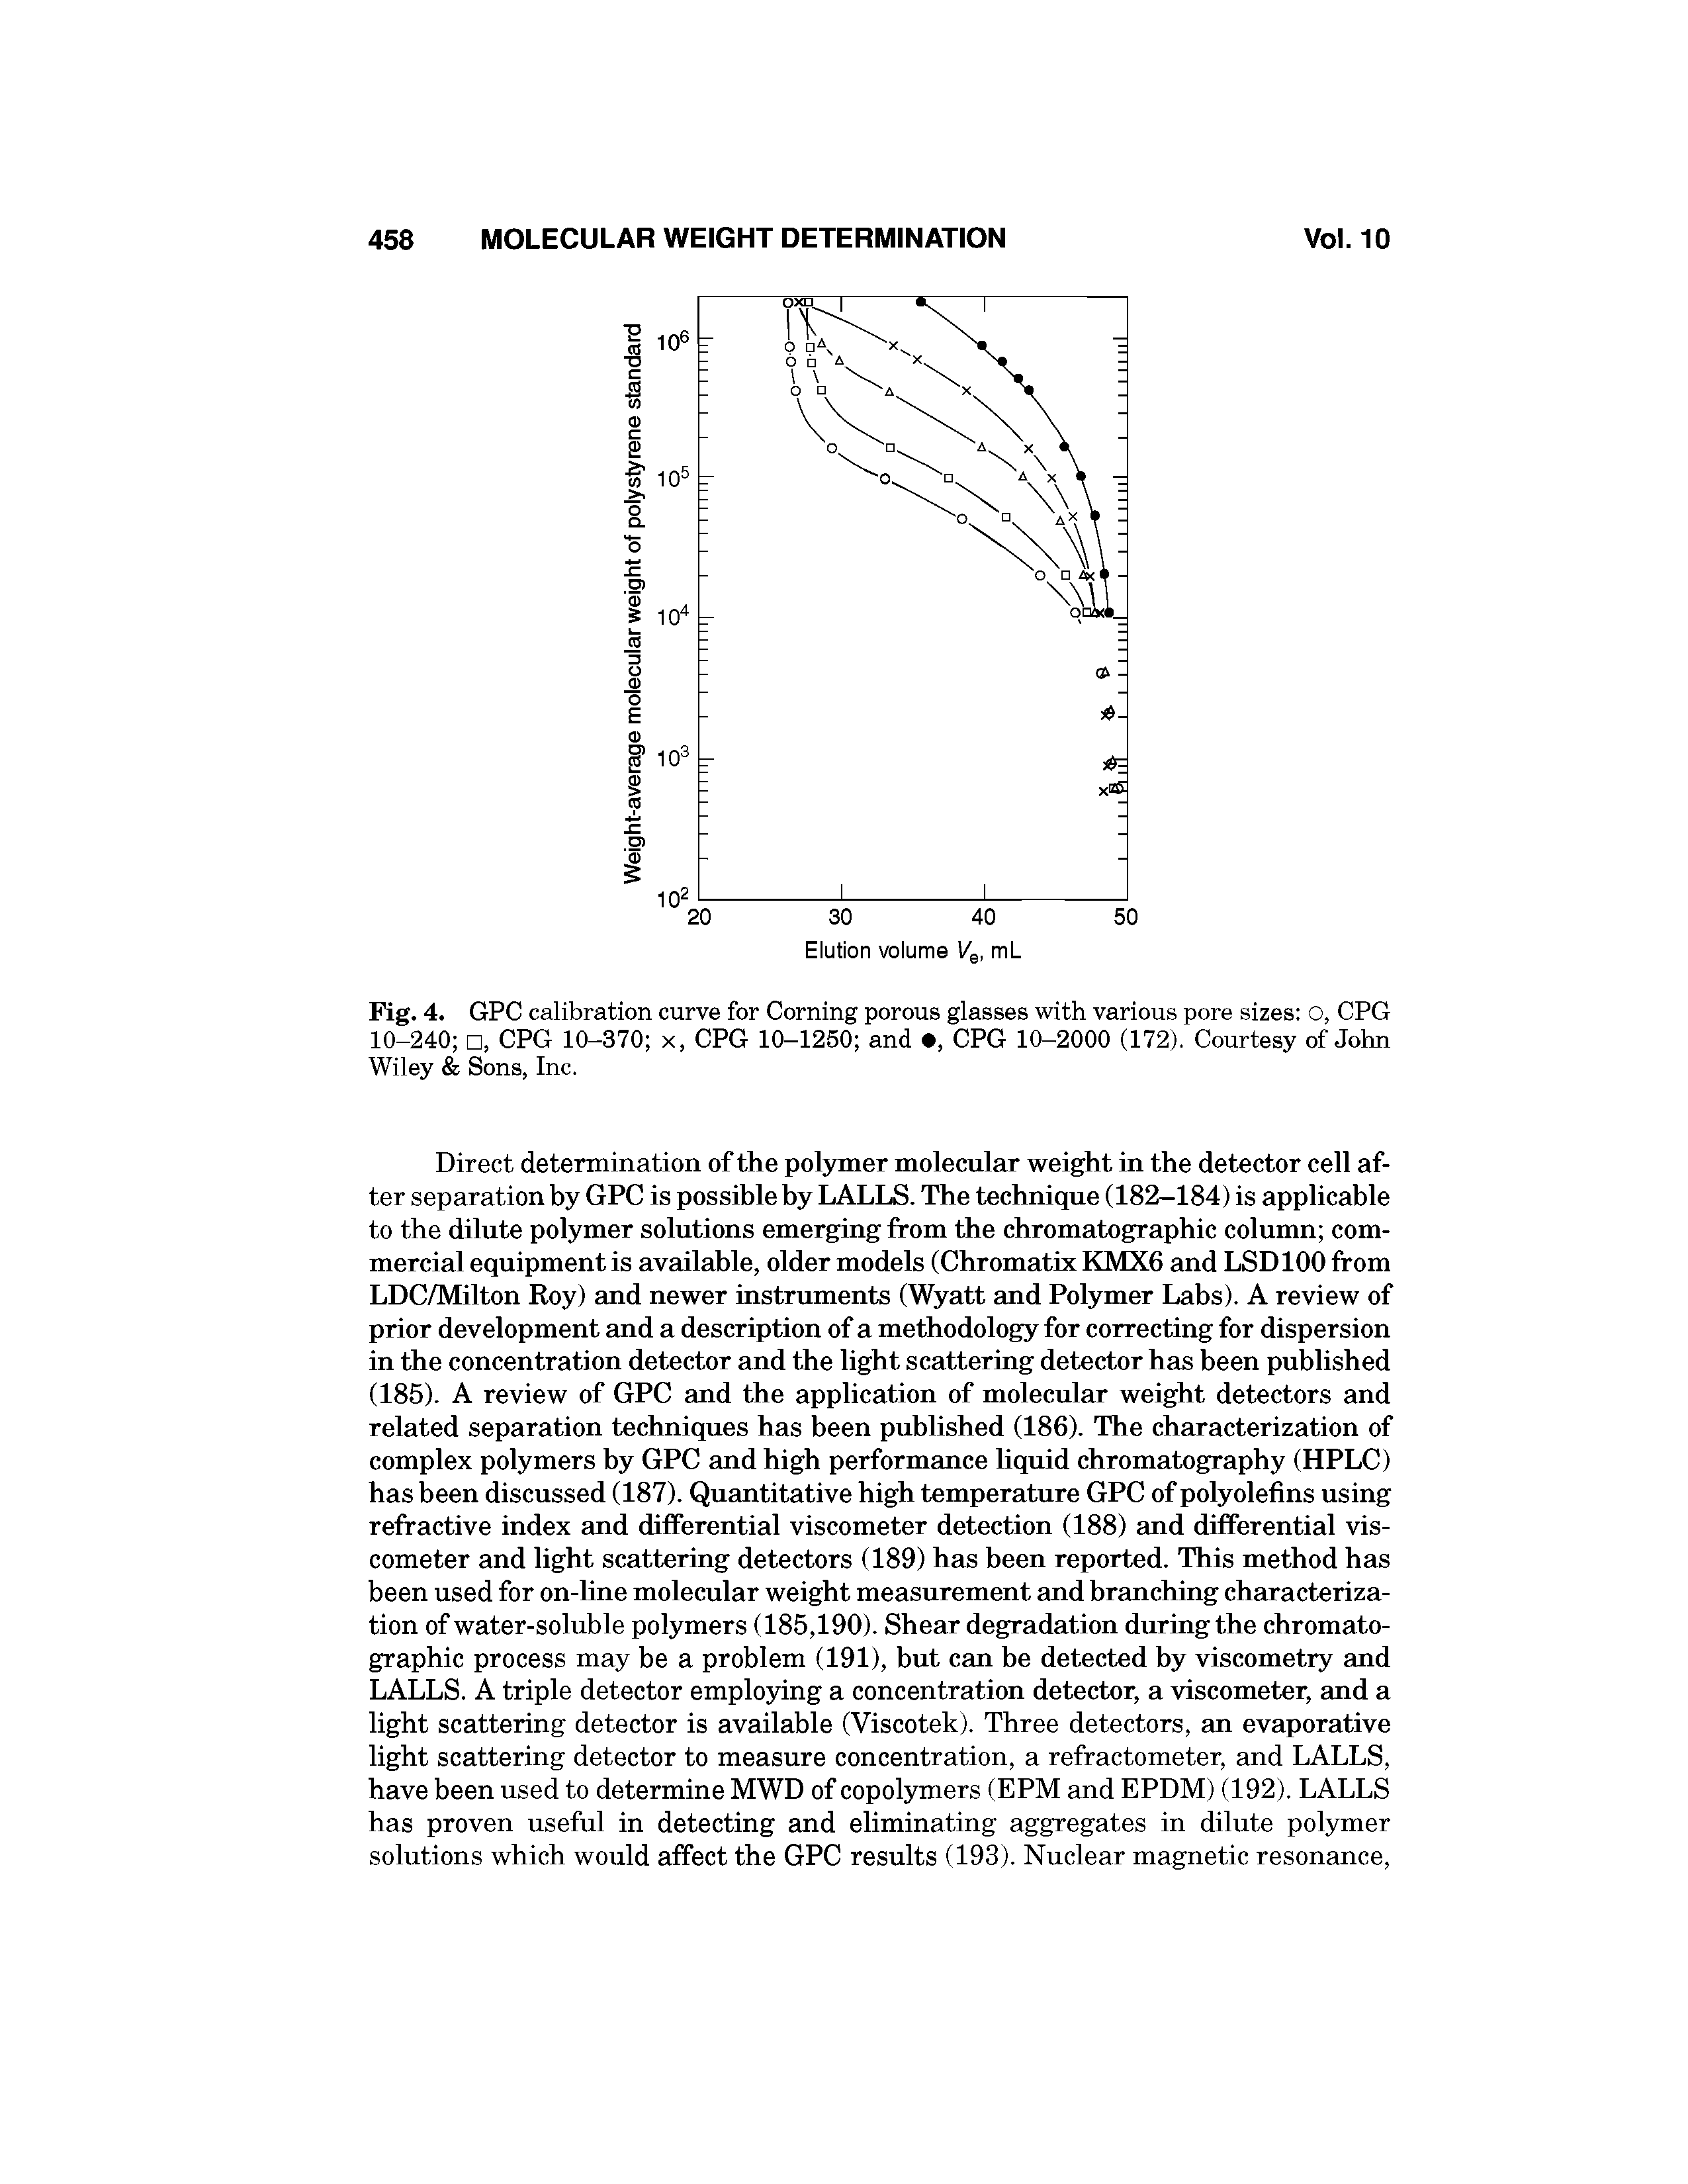 Fig. 4. GPC calibration curve for Corning porous glasses with various pore sizes O, CPG 10-240 , CPG 10-370 x, CPG 10-1250 and , CPG 10-2000 (172). Courtesy of John Wiley Sons, Inc.